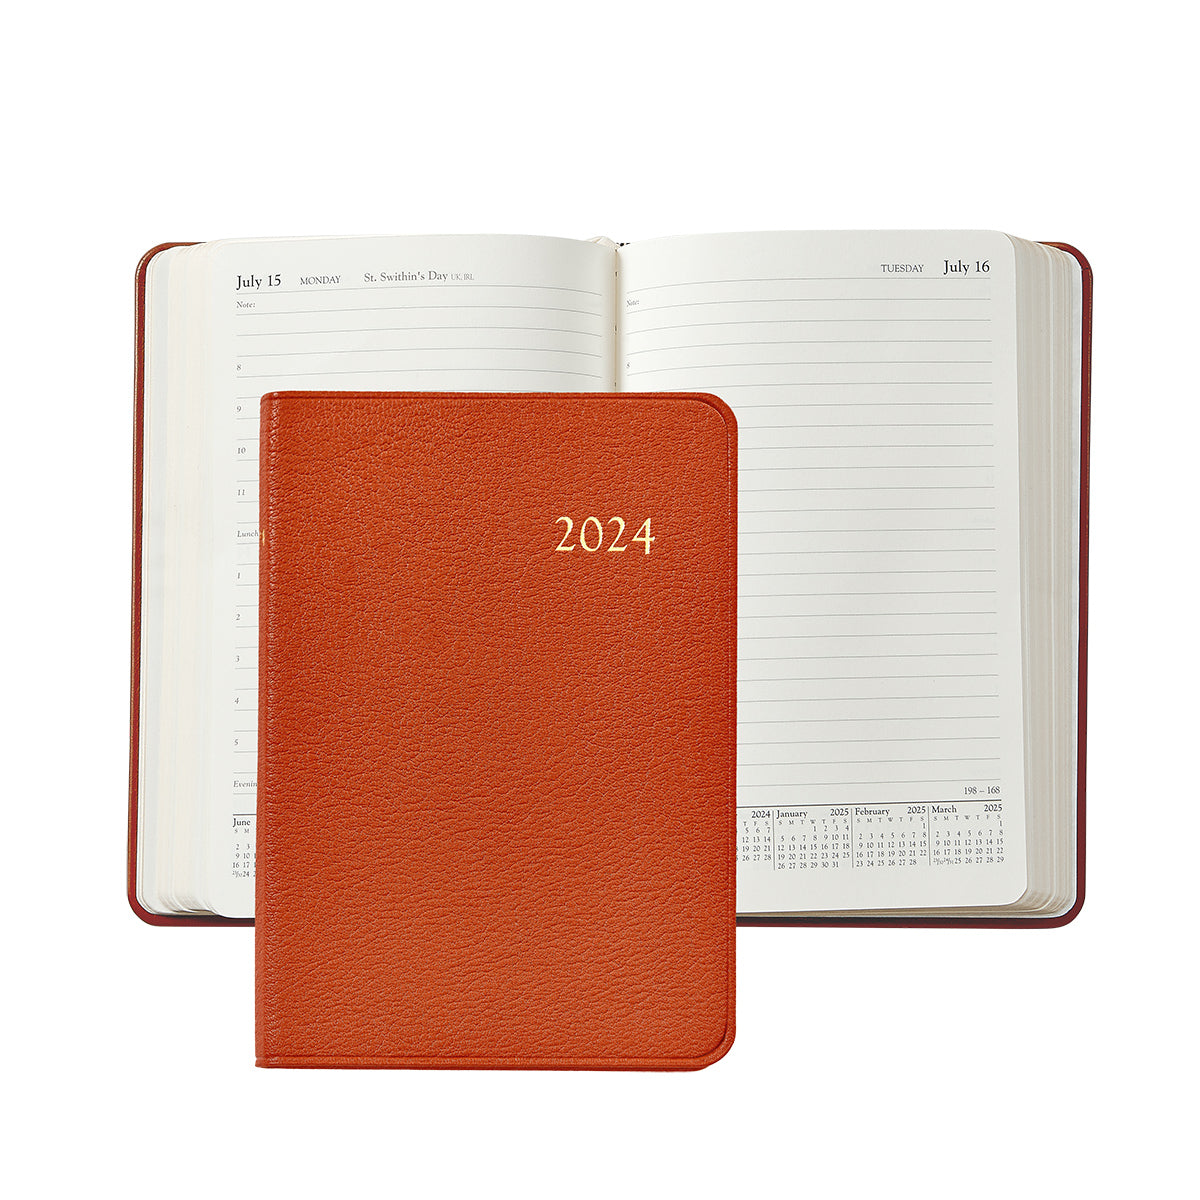 Graphic Image 2024 Daily Journal Planner Orange Goatskin Leather